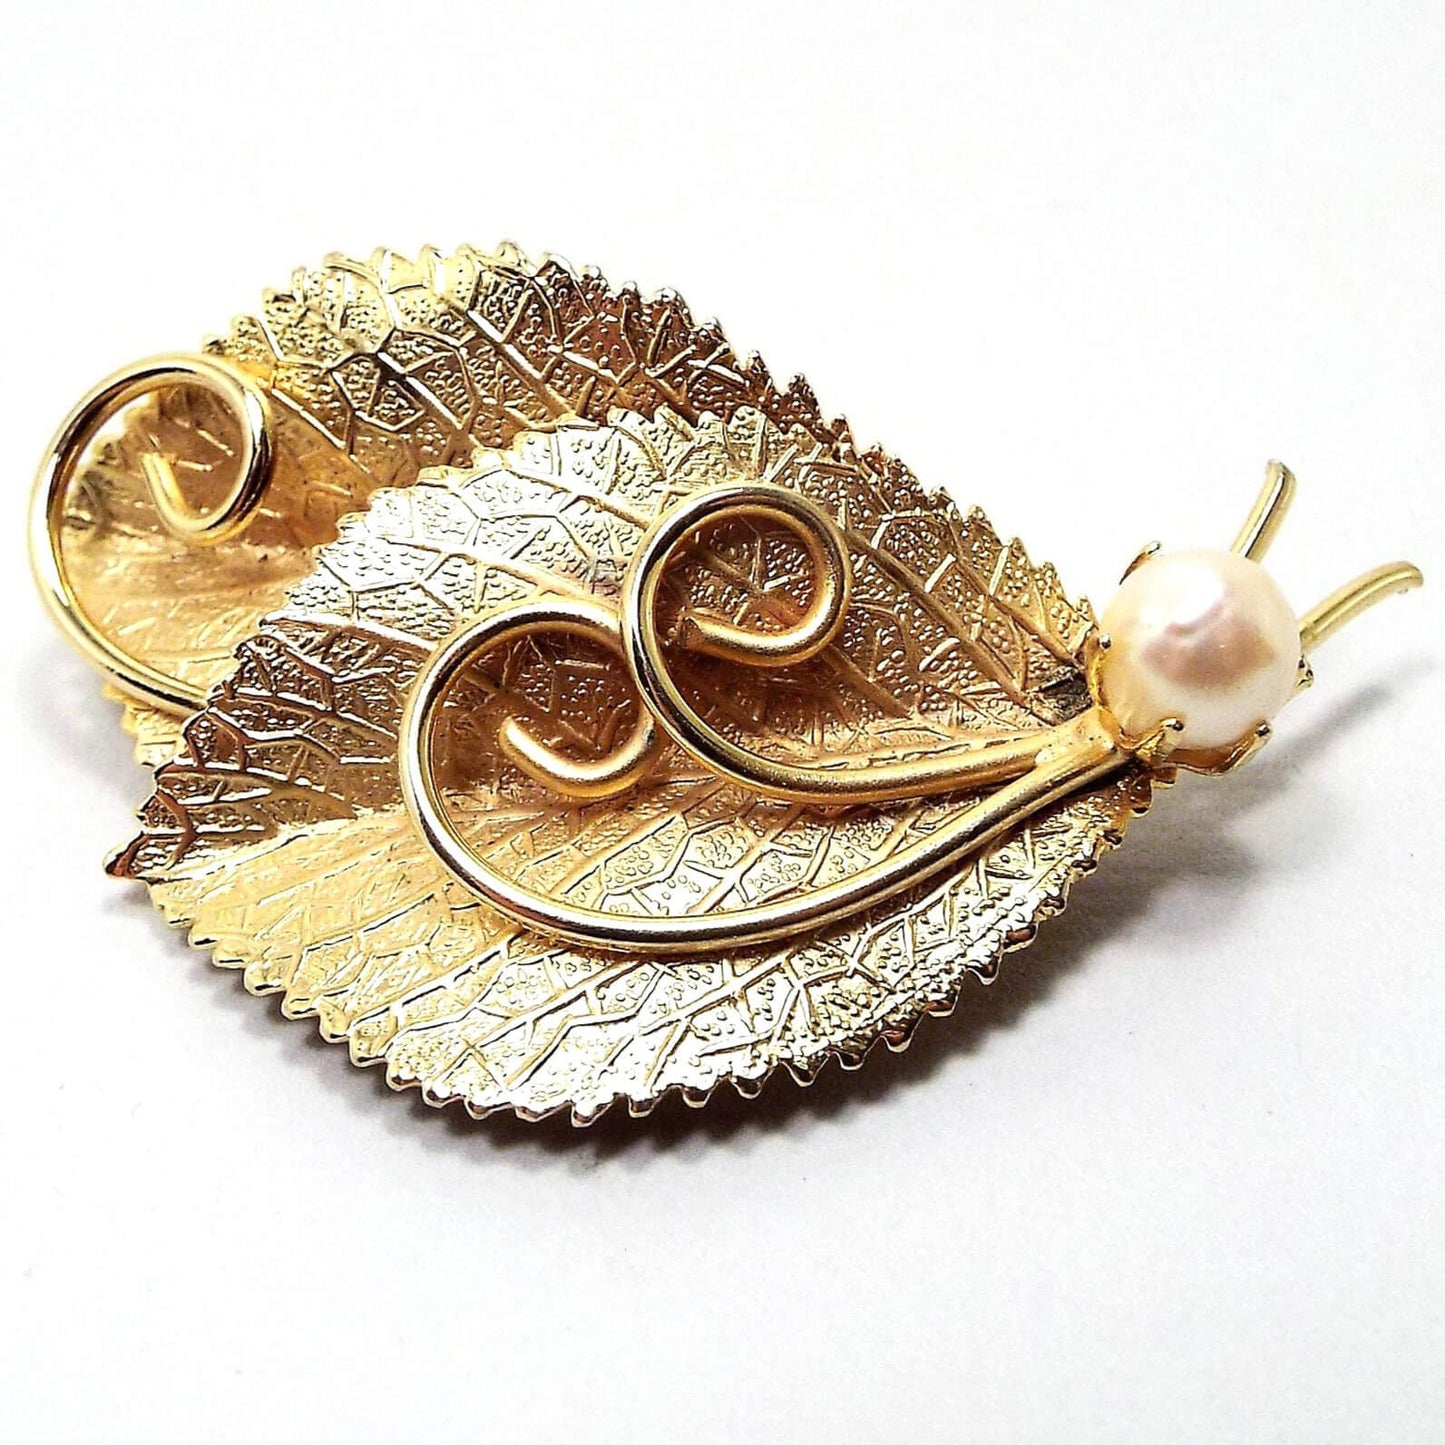 Front view of the retro vintage cultured pearl brooch. The metal is gold tone in color. It is designed like two textured leaves with stems and metal curls in the middle. At the bottom by the stems is a prong set round cultured pearl in a light off white color.